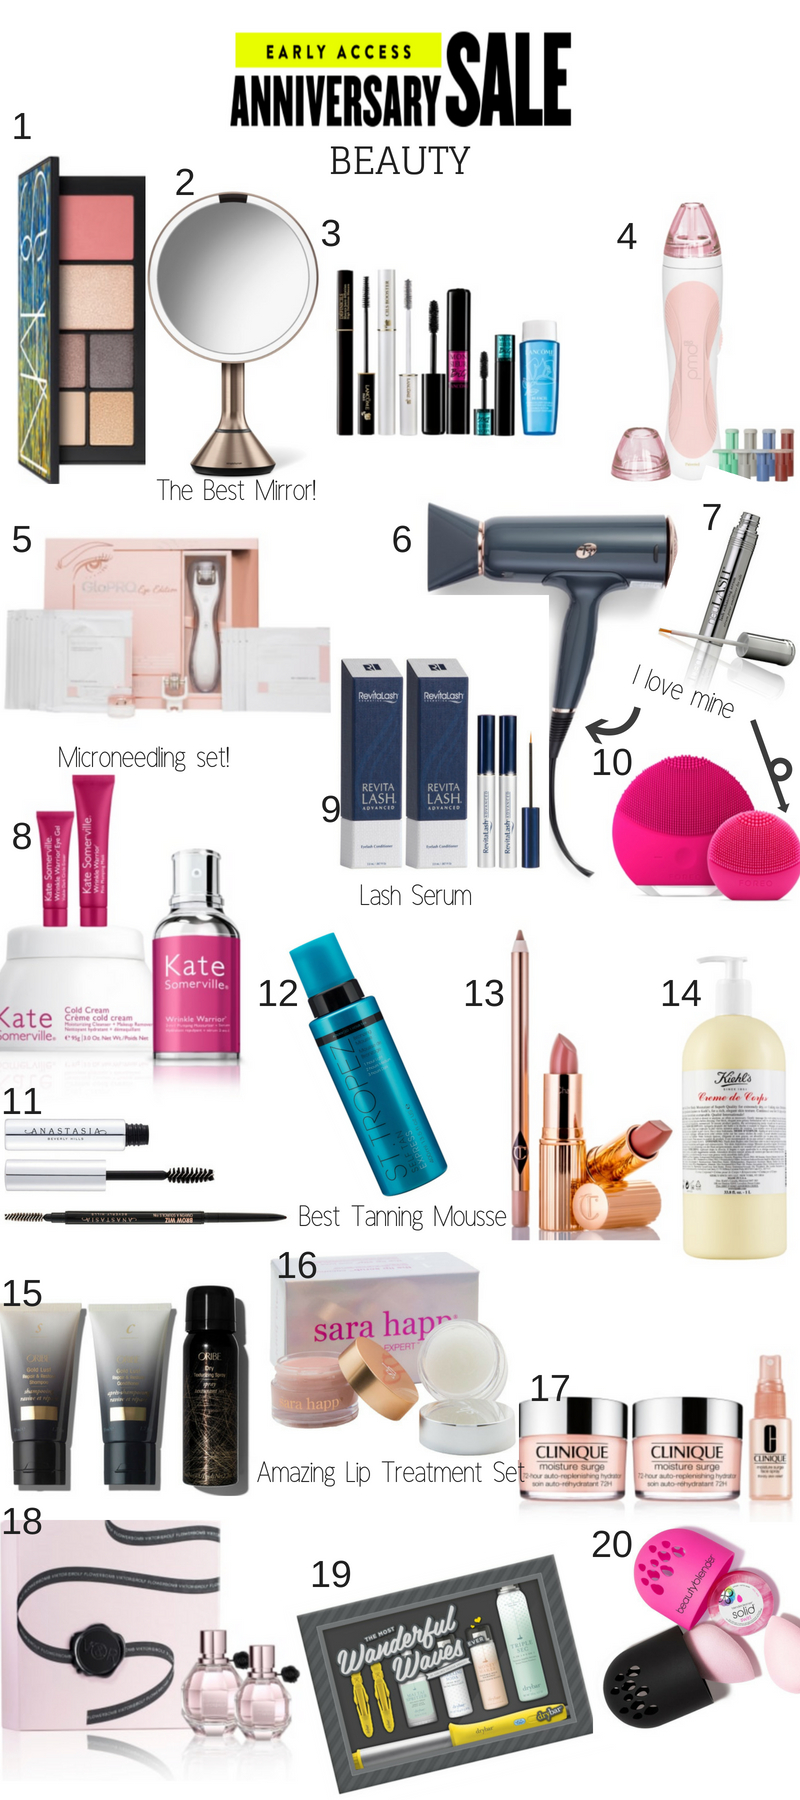 Best Beauty Deals from the Nordstrom Anniversary Sale featured by popular Las Vegas fashion blogger, Outfits & Outings